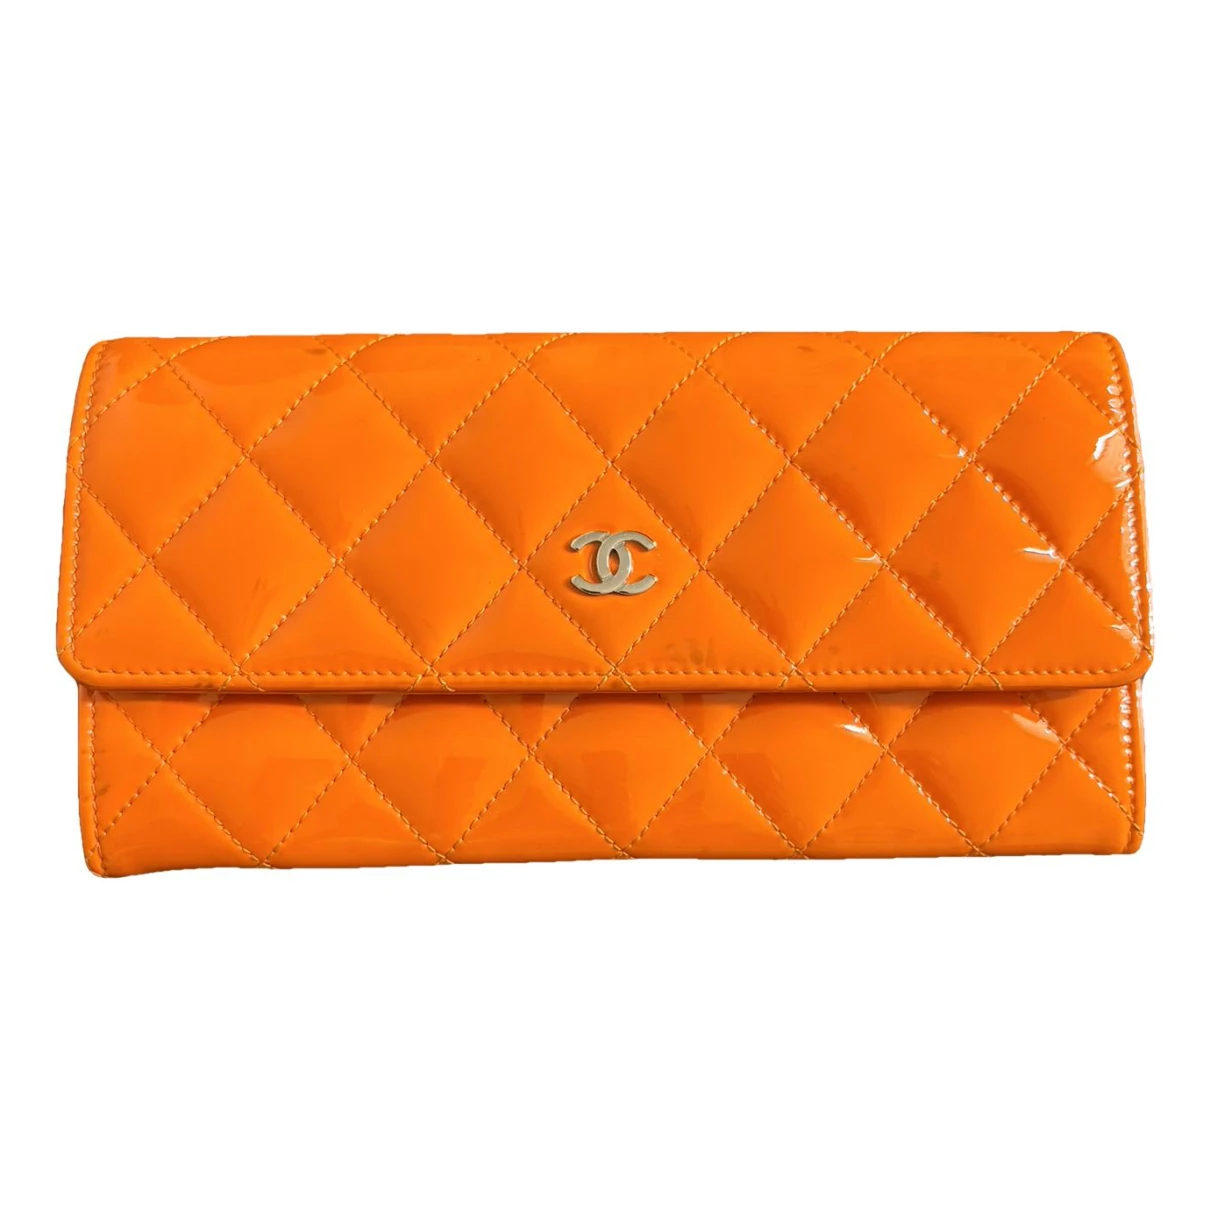 Pre-owned Chanel Timeless/classique Patent Leather Wallet In Orange